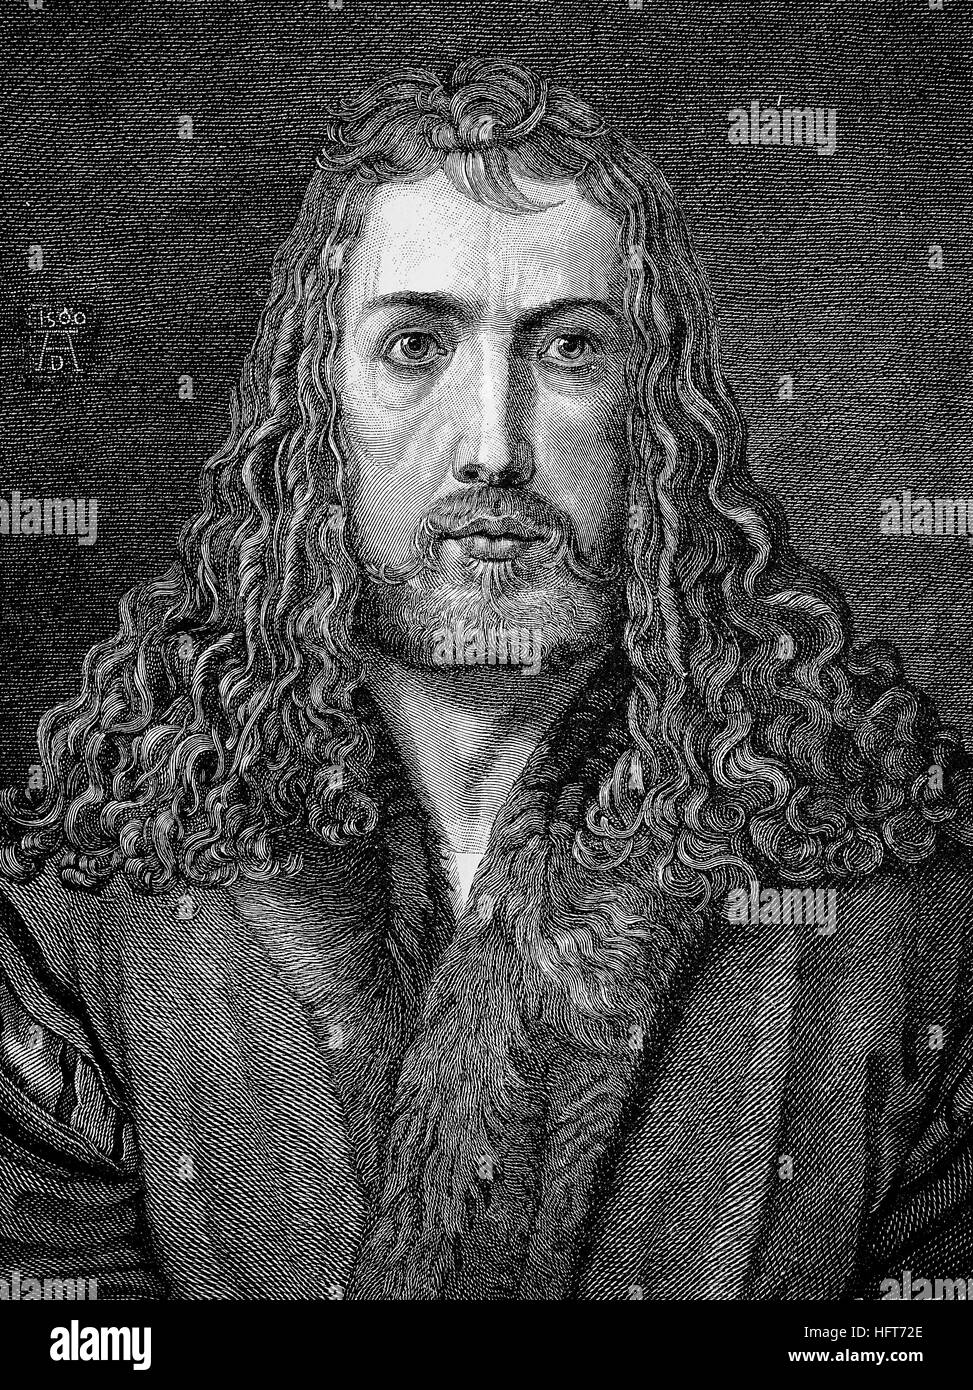 Albrecht Duerer, 1471-1528, a painter, printmaker, and theorist of the German Renaissance, Self-Portrait at 28, 1500, woodcut from the year 1885, digital improved Stock Photo